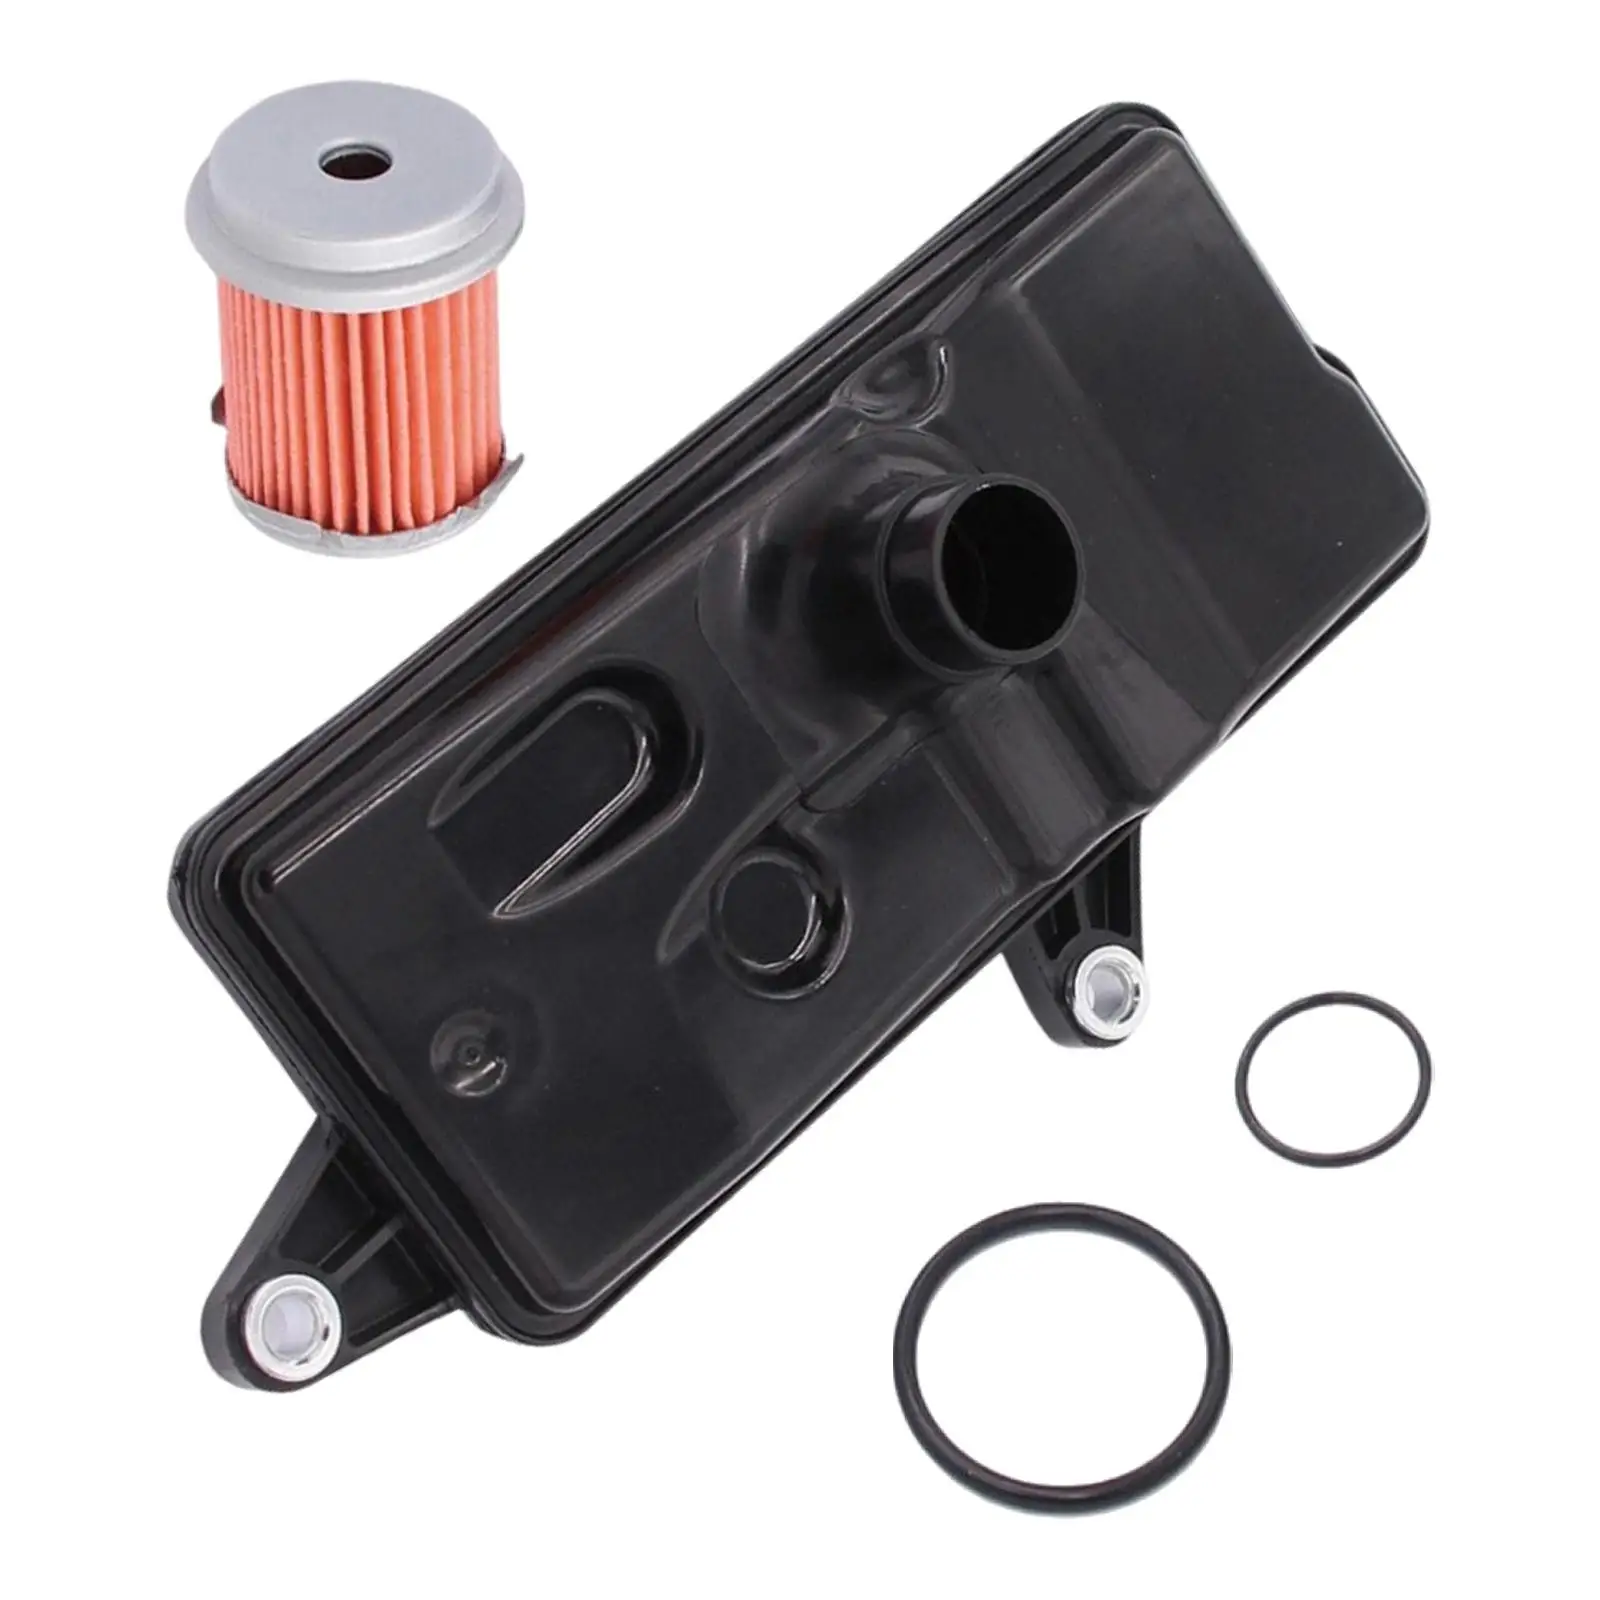 Gearbox Filter Transmission Filter Assy 25420-5T0-003 Black for Civic FC7